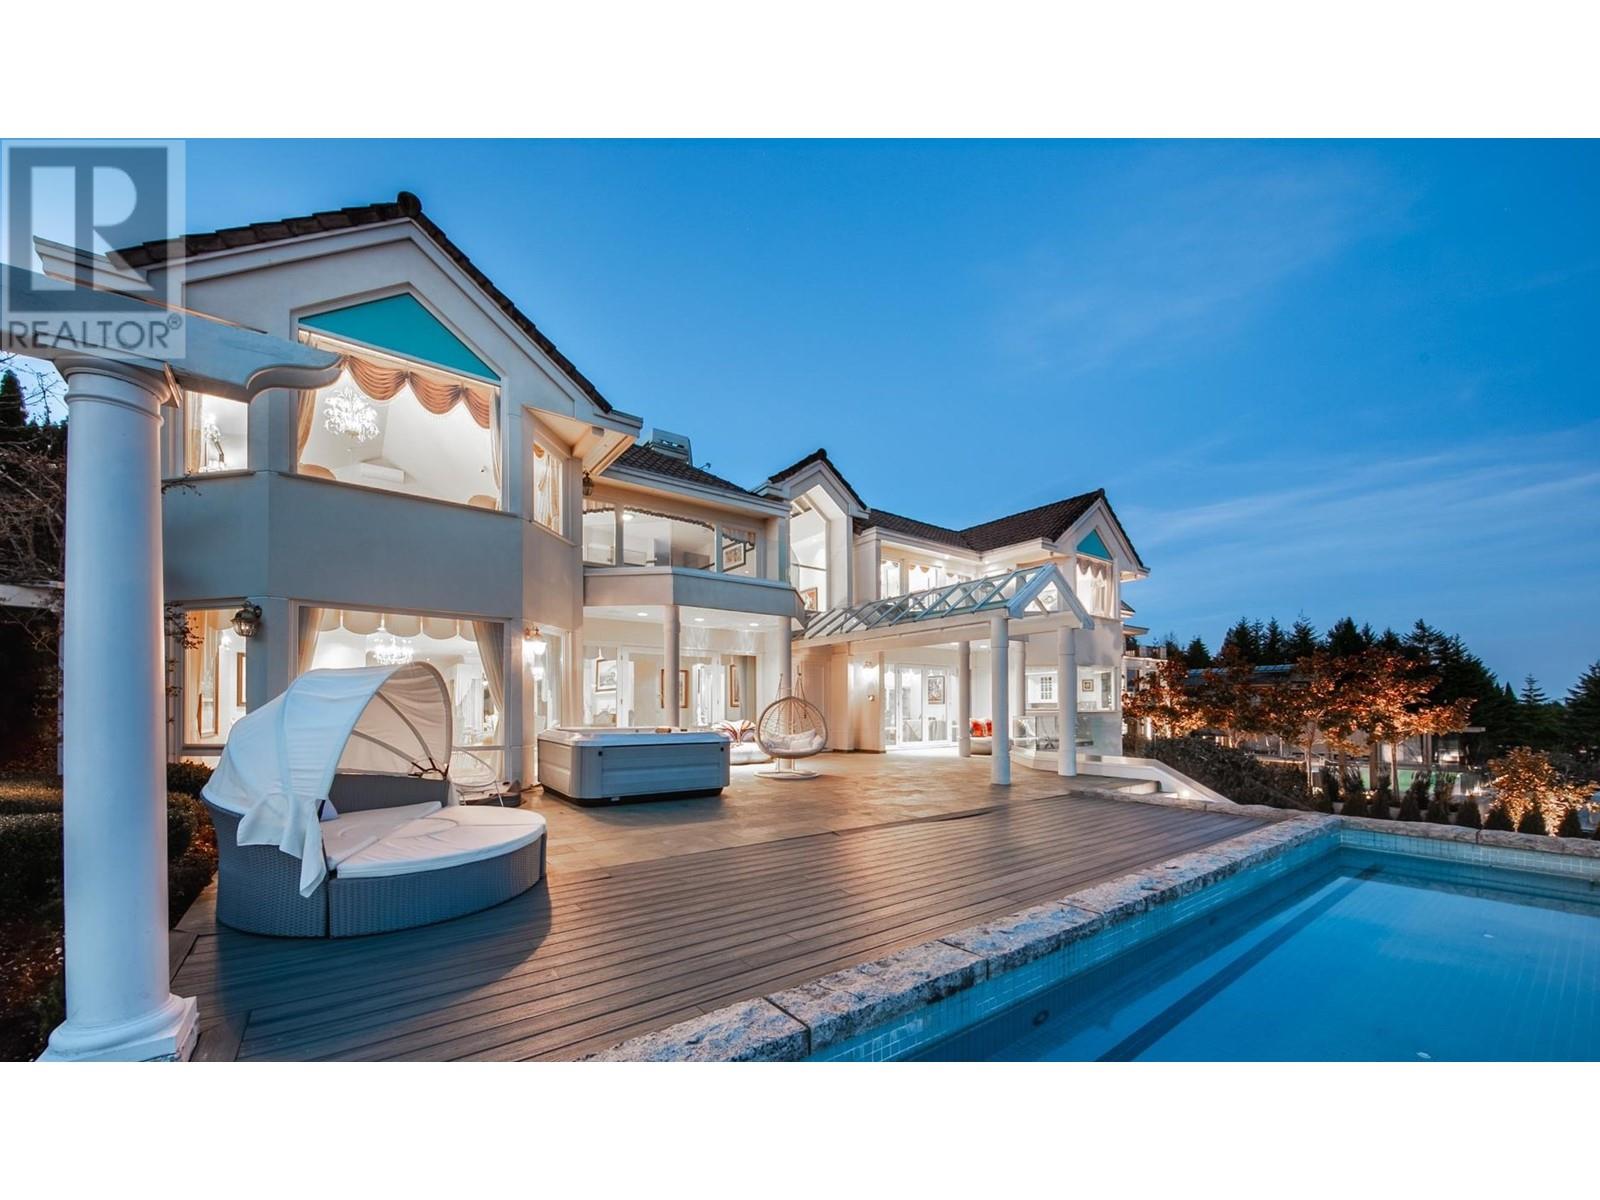 965 KING GEORGES WAY, west vancouver, British Columbia